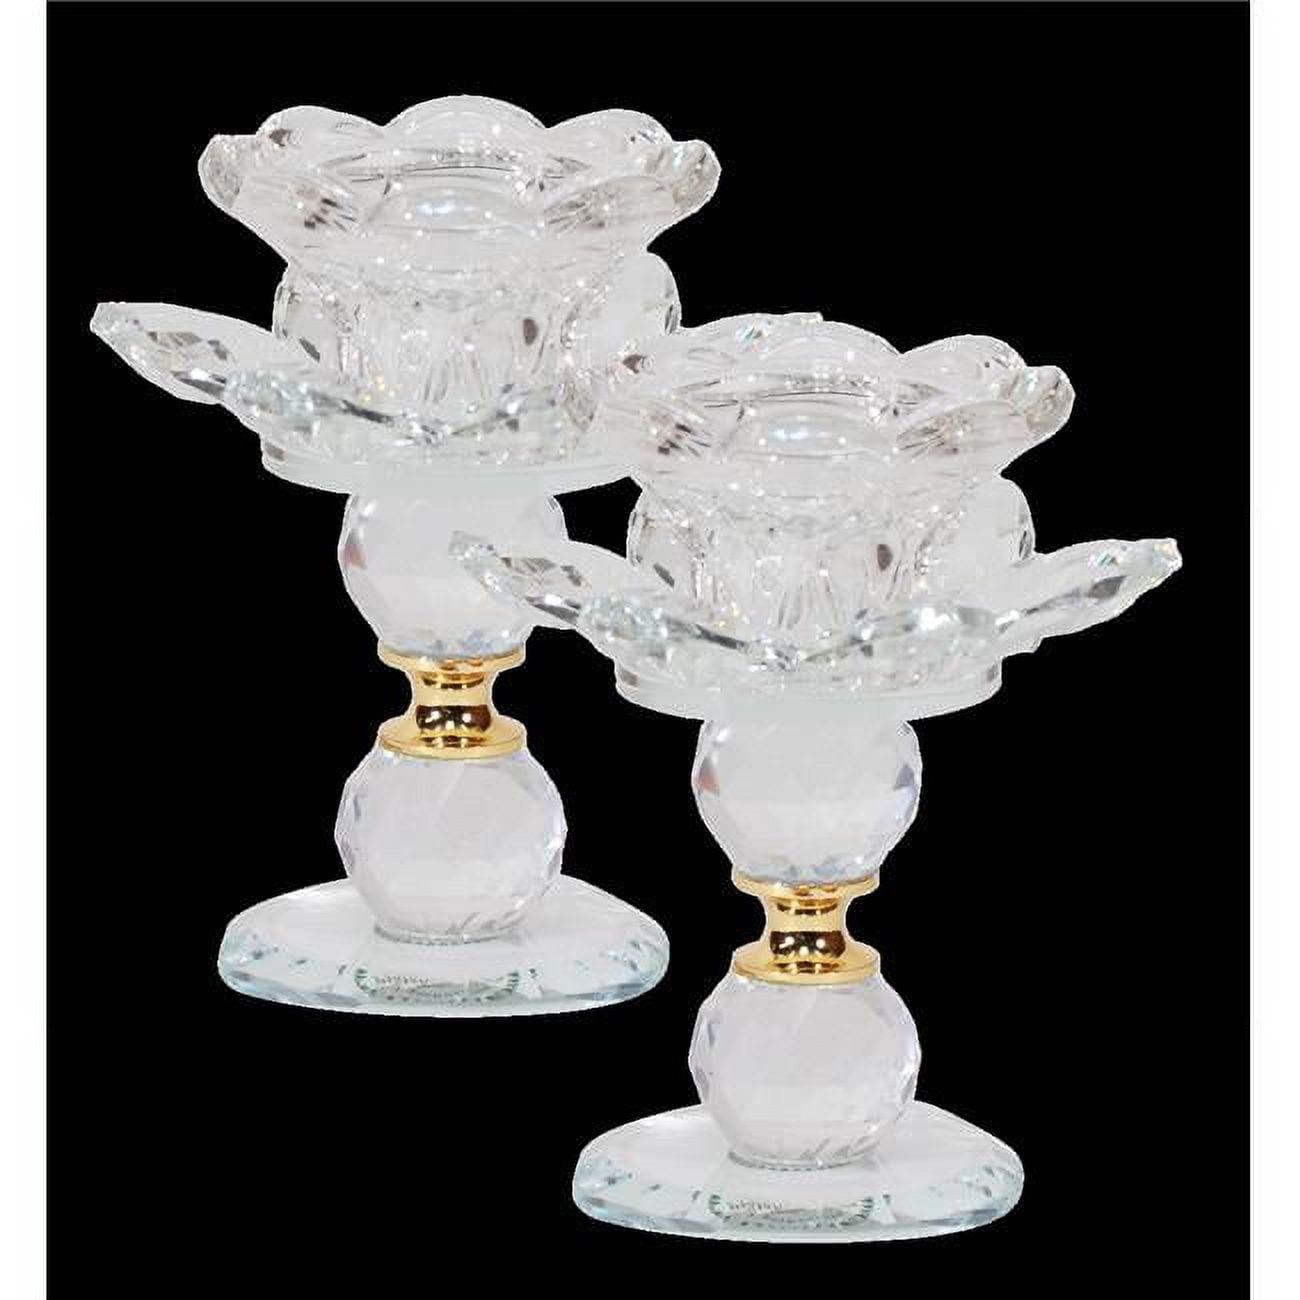 Picture of Schonfeld Collection 182979 4.5 in. Crystal Candle Holder with Gold Filling, 2 Piece